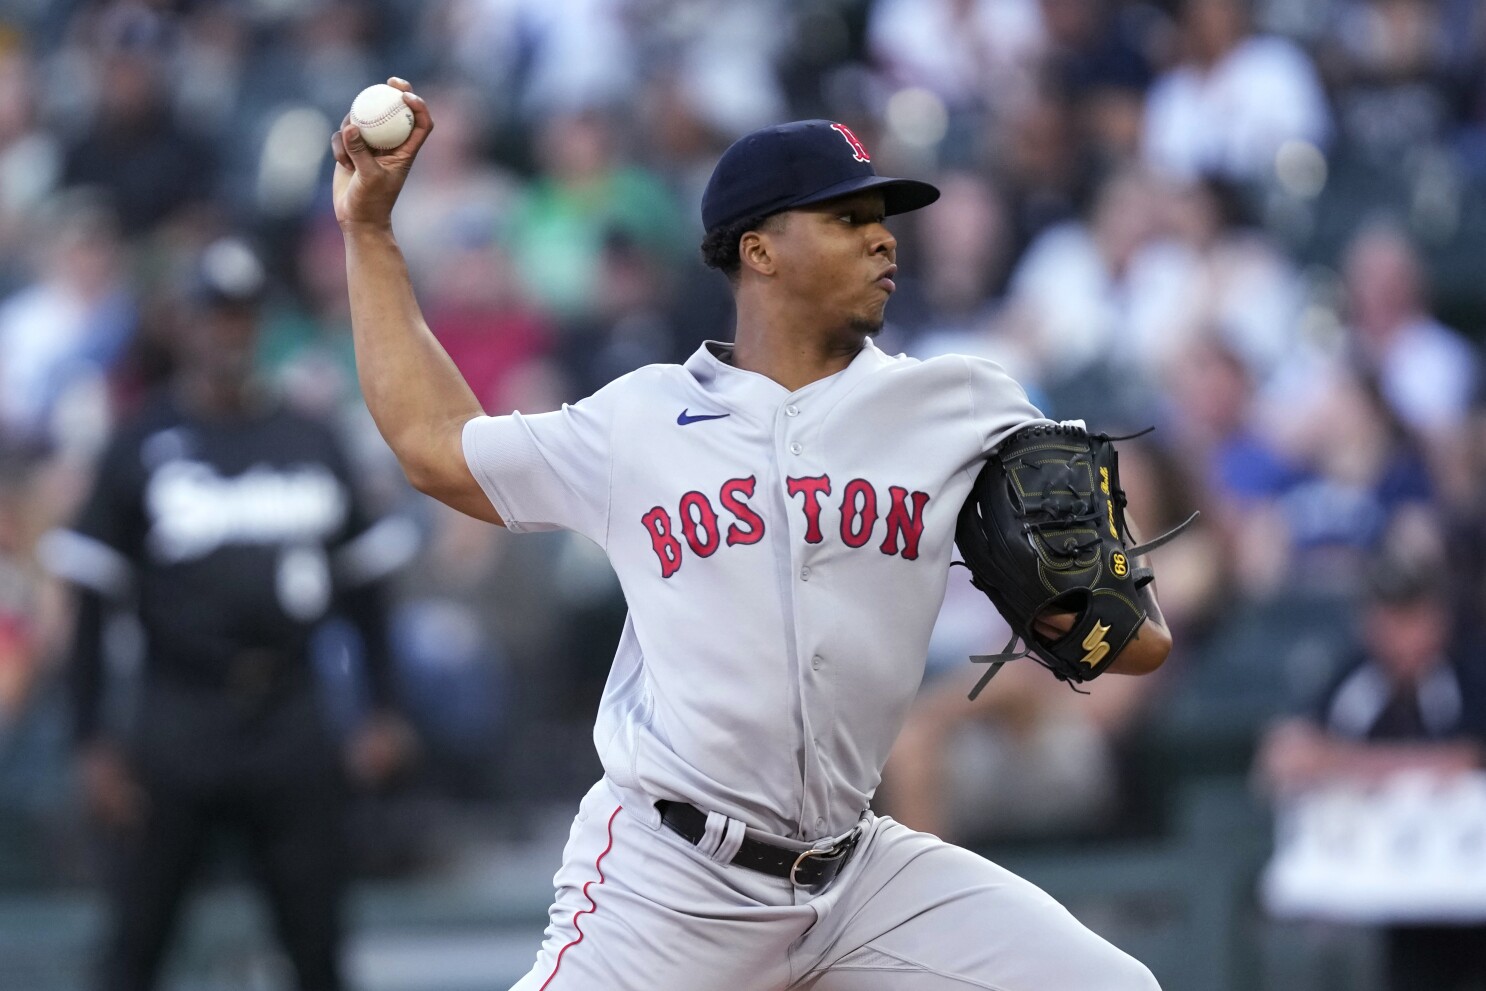 Brayan Bello 7th inning the Boston Red Sox beat the Chicago White Sox 3-1 | AP News